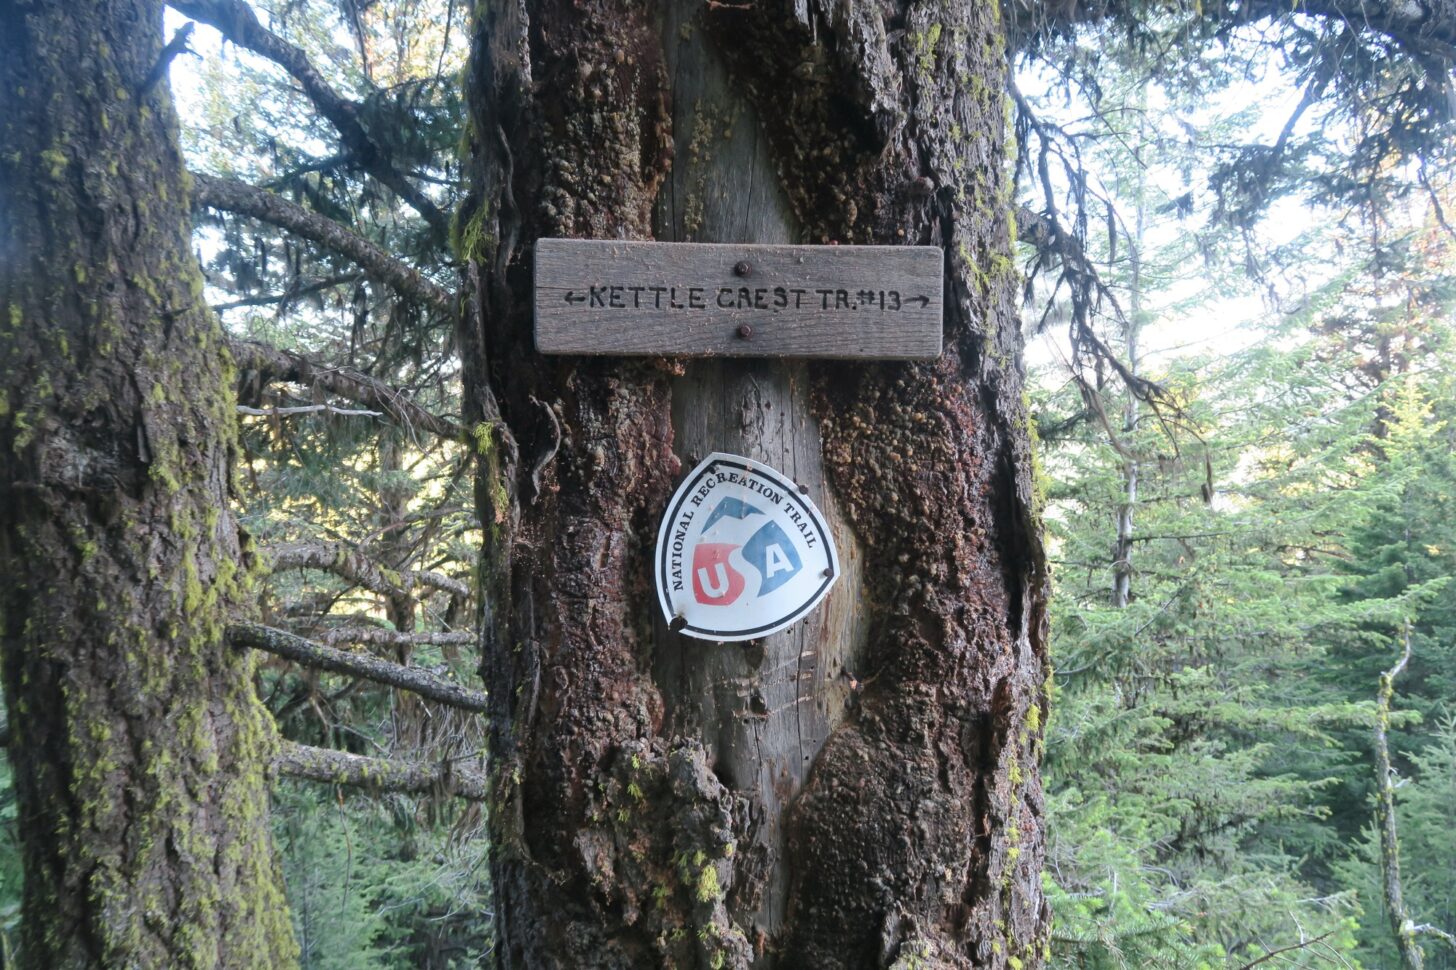 Trail signs are nailed to a tree in a national forest.